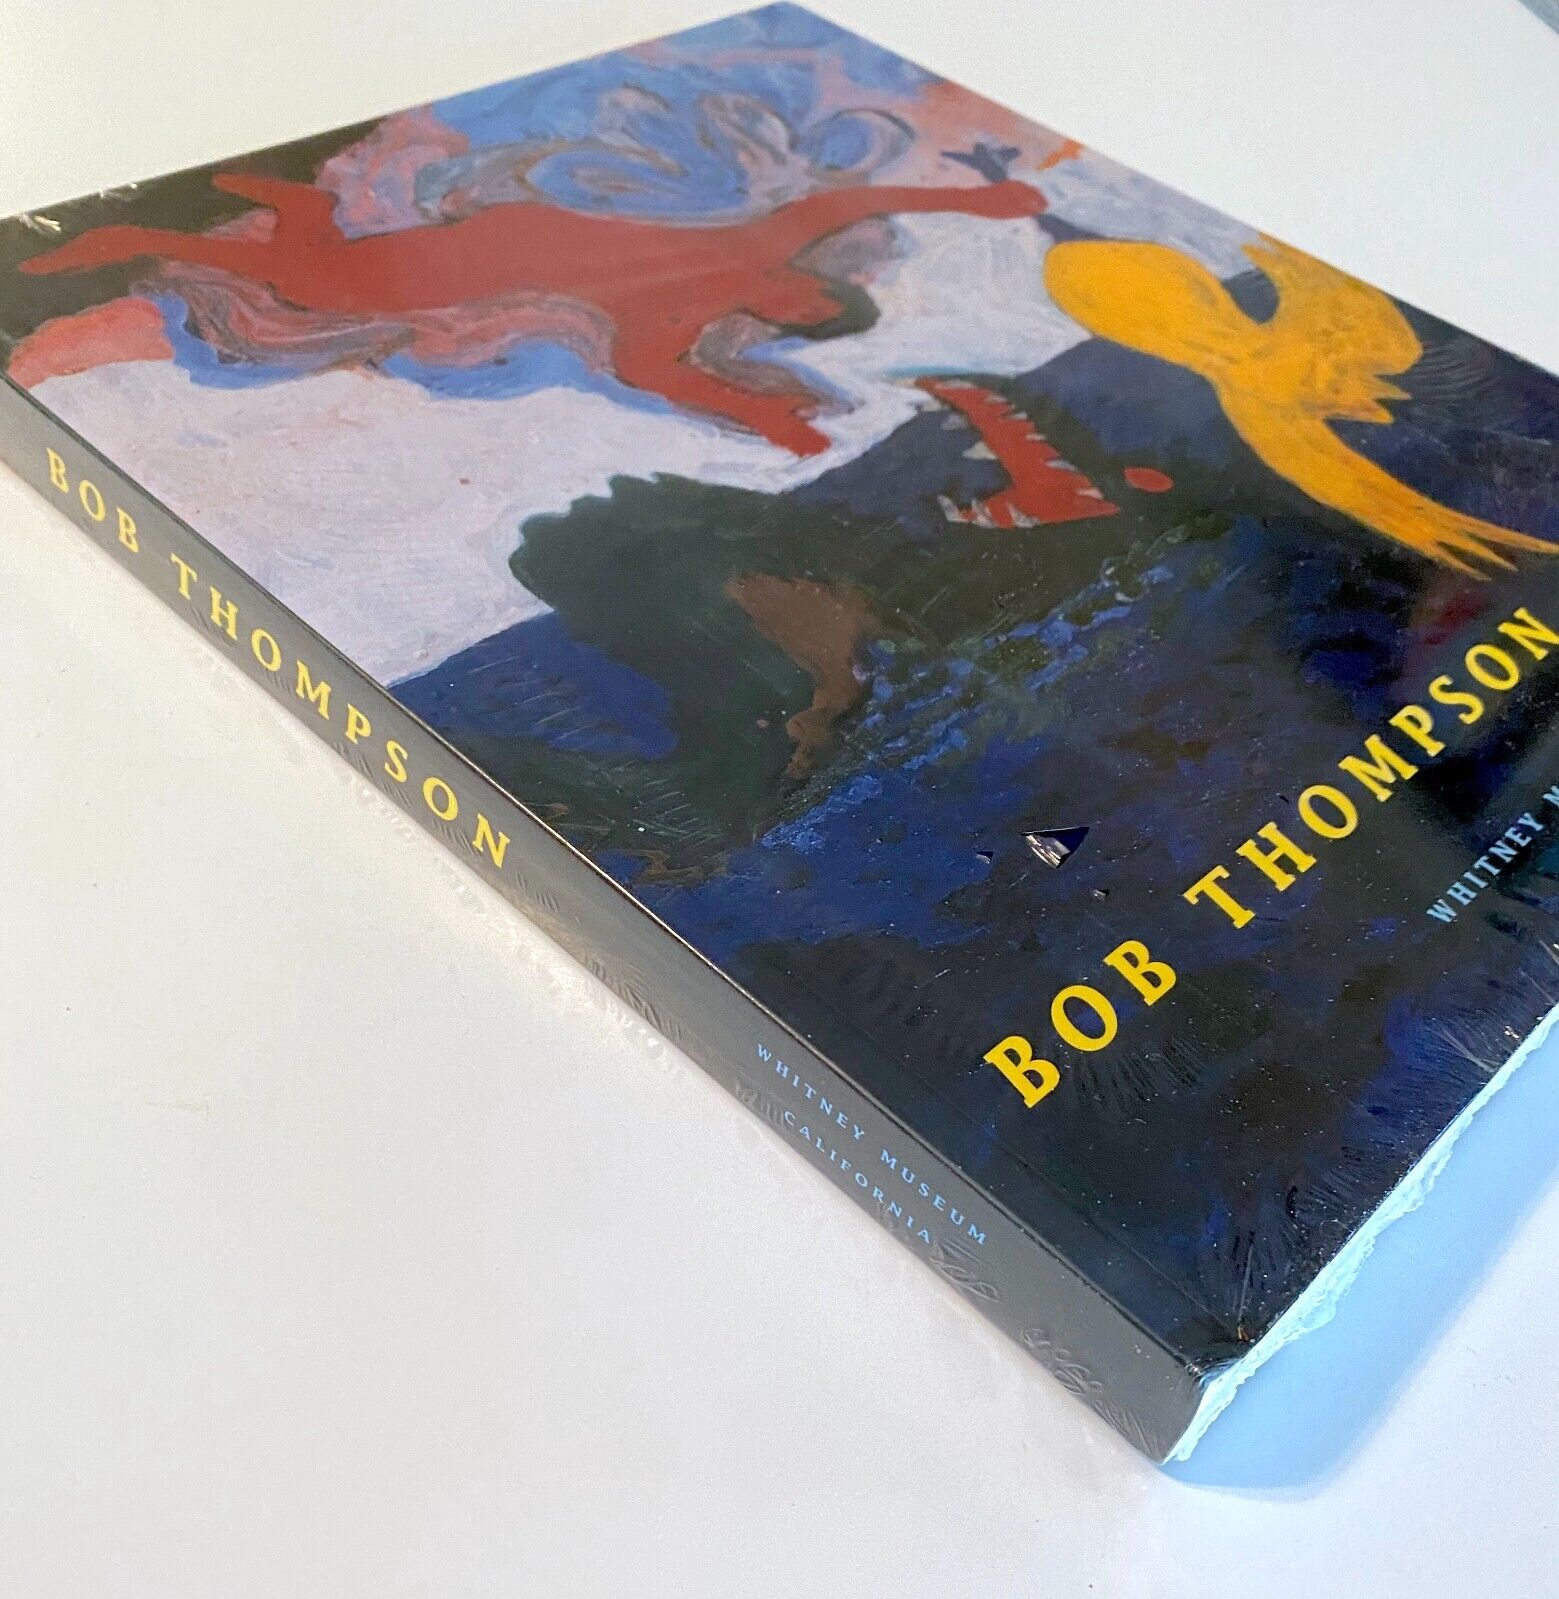 *SEALED* Bob Thompson: by Thelma Golden, Softcover, Whitney Museum, Exhibition